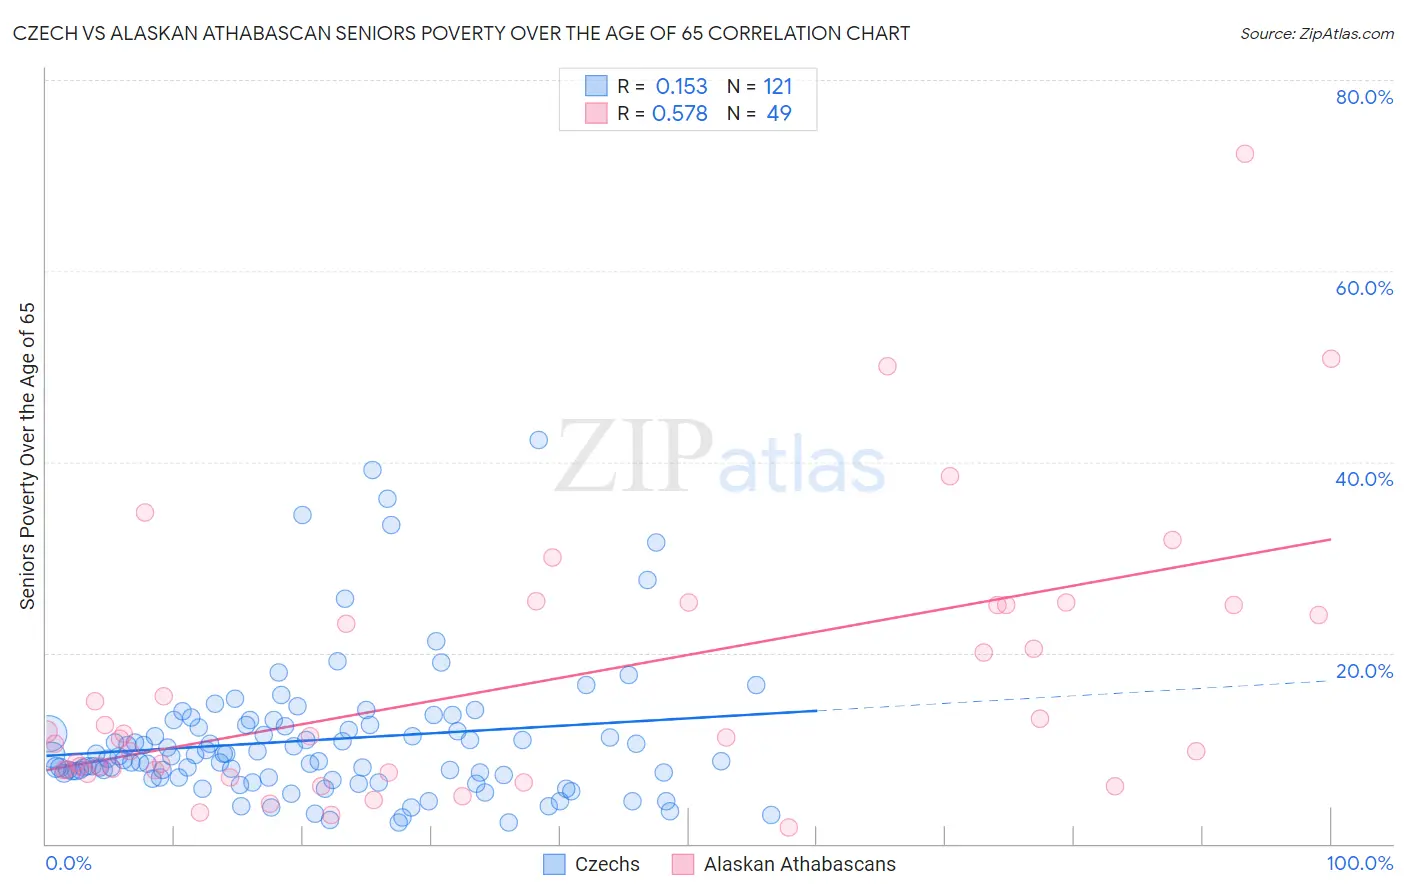 Czech vs Alaskan Athabascan Seniors Poverty Over the Age of 65